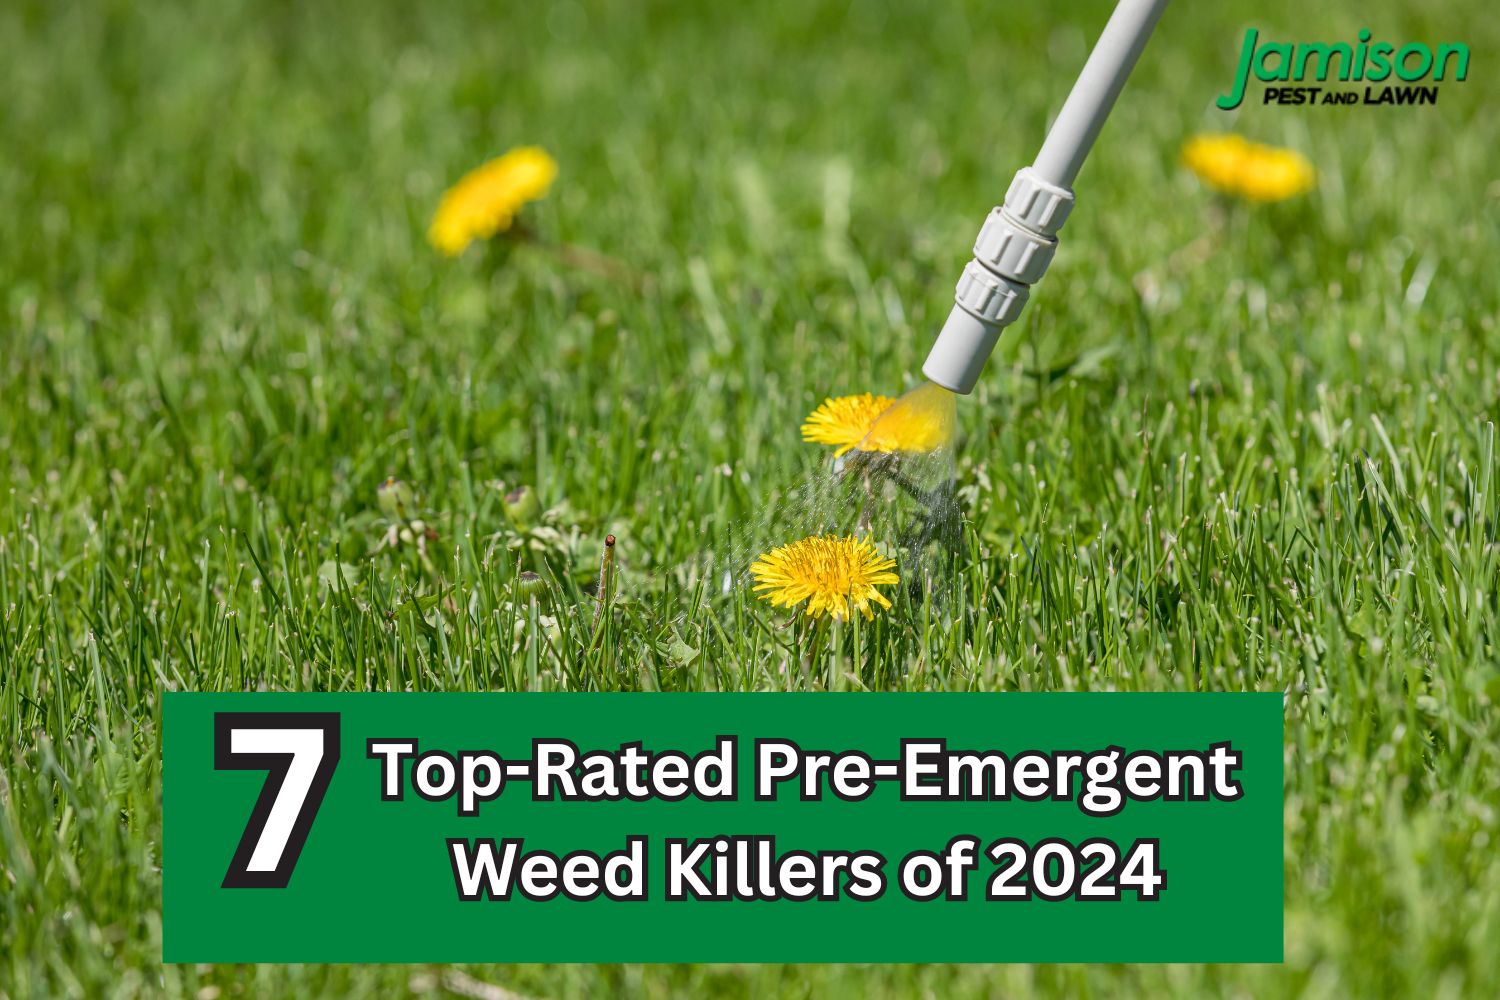 7 Top-Rated Pre-Emergent Weed Killers of 2024